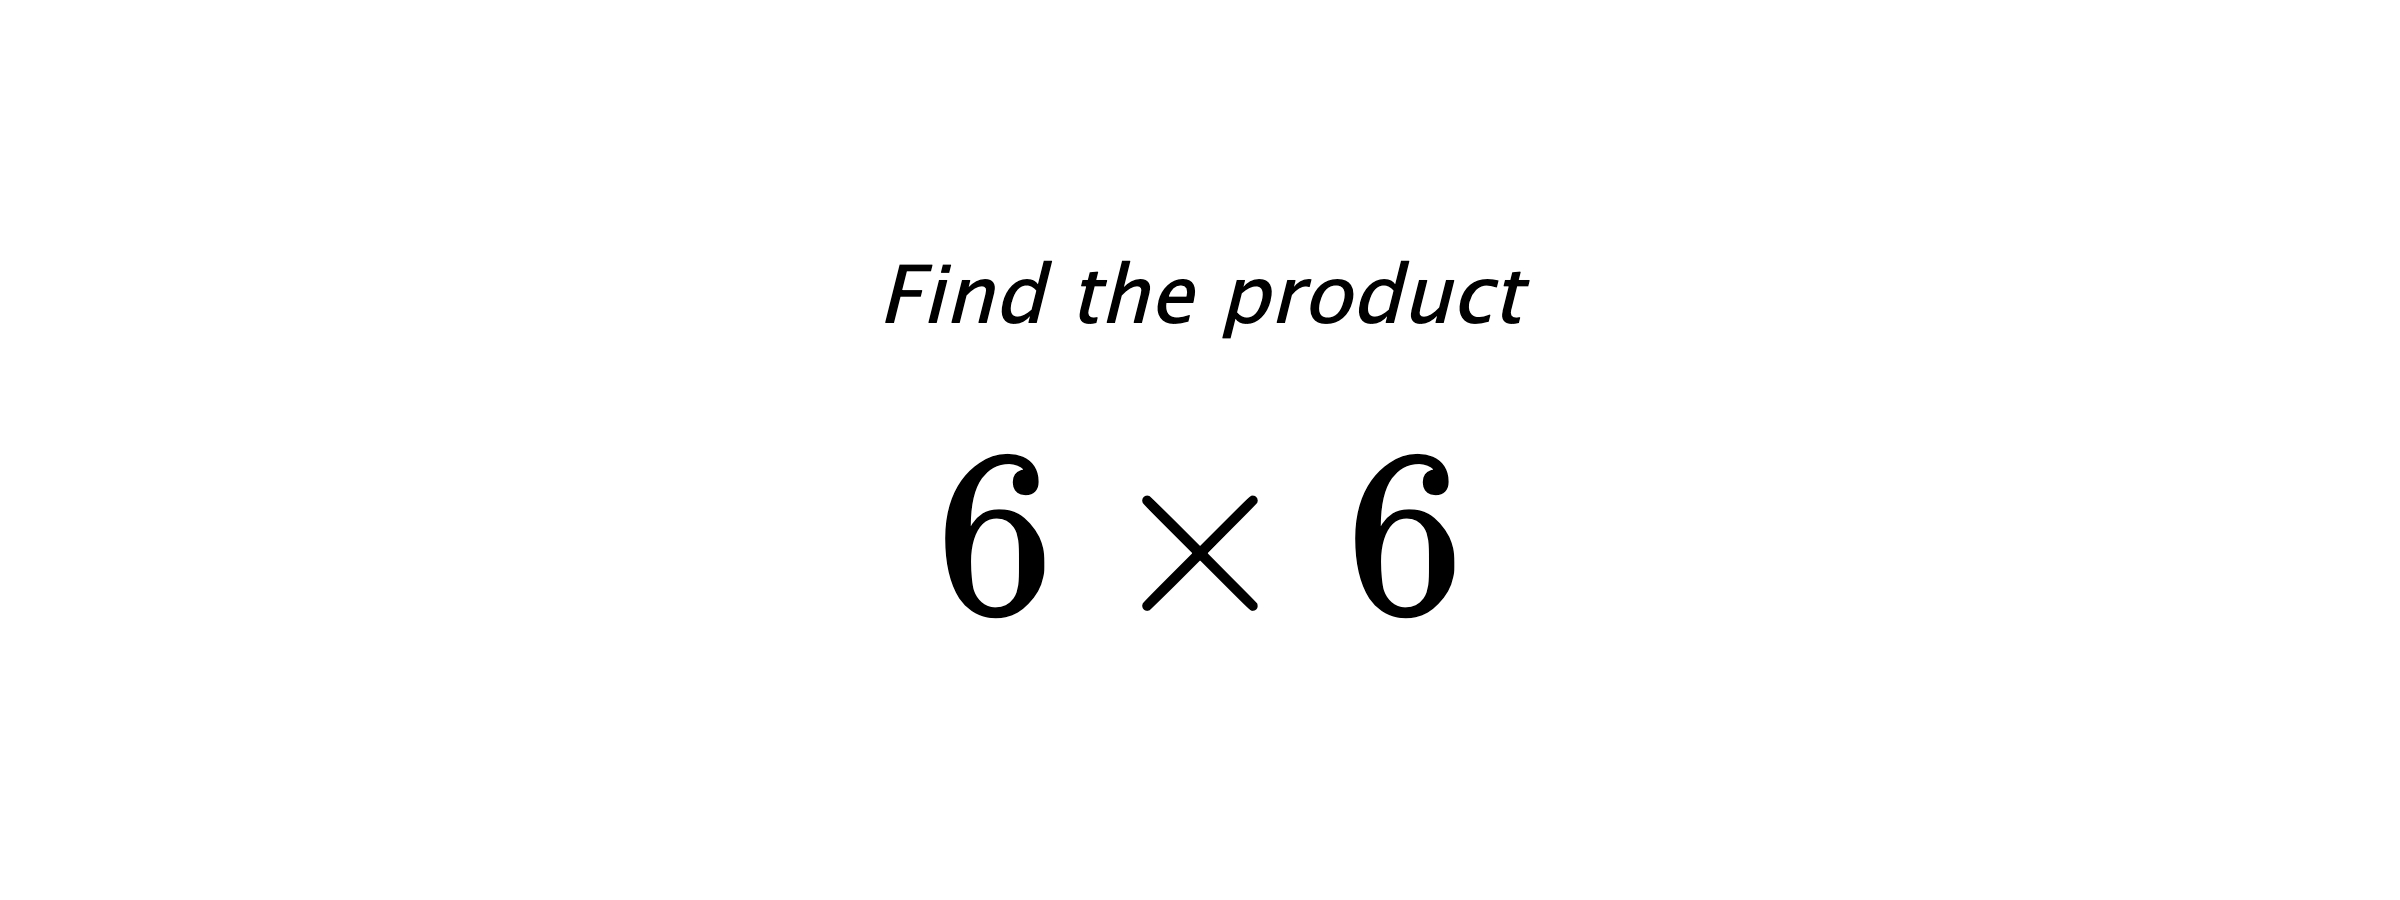 Find the product $ 6 \times 6 $